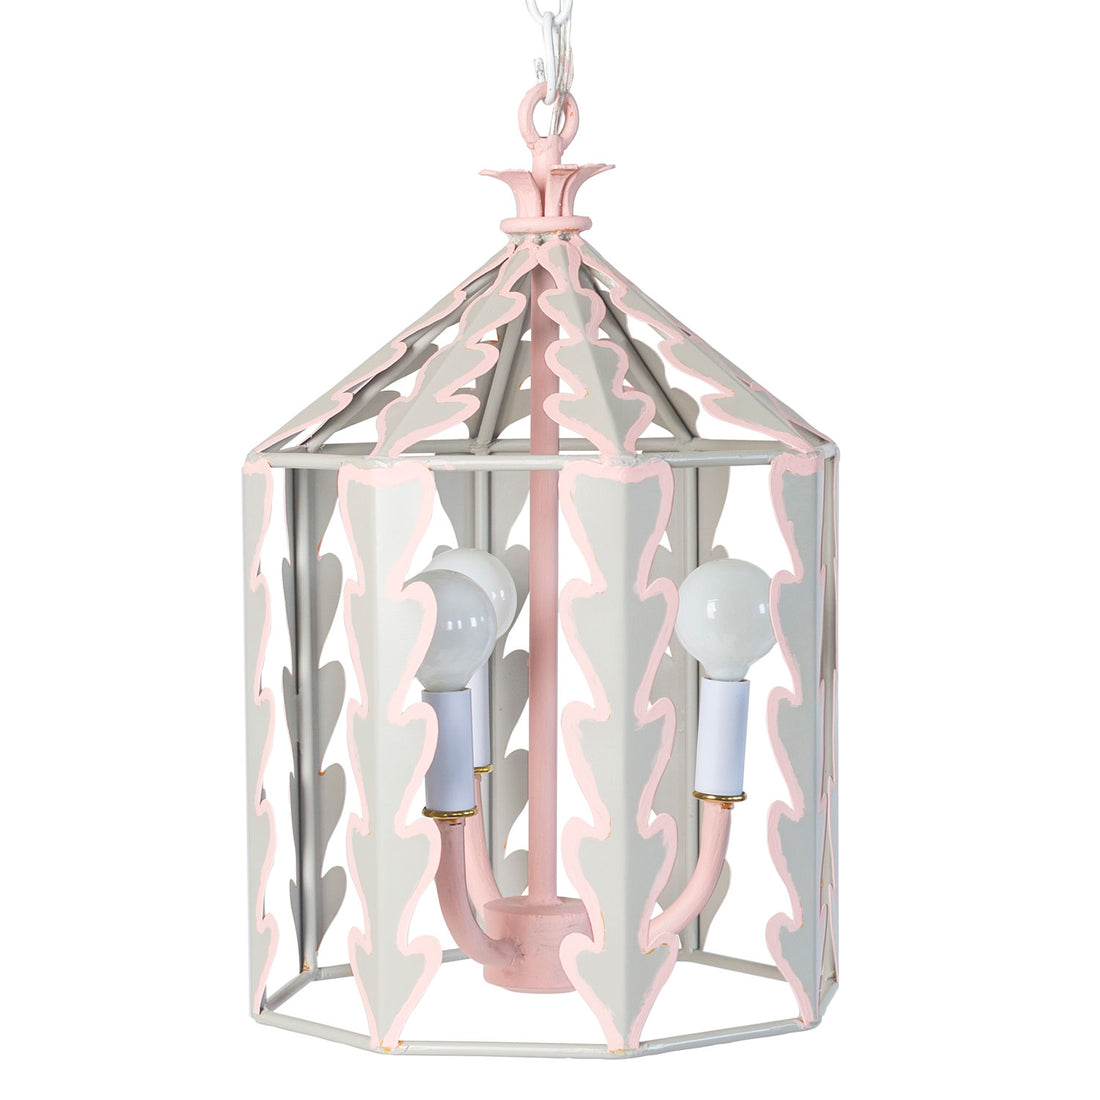 soft gray and pink iron hanging lantern with leaf like cut outs